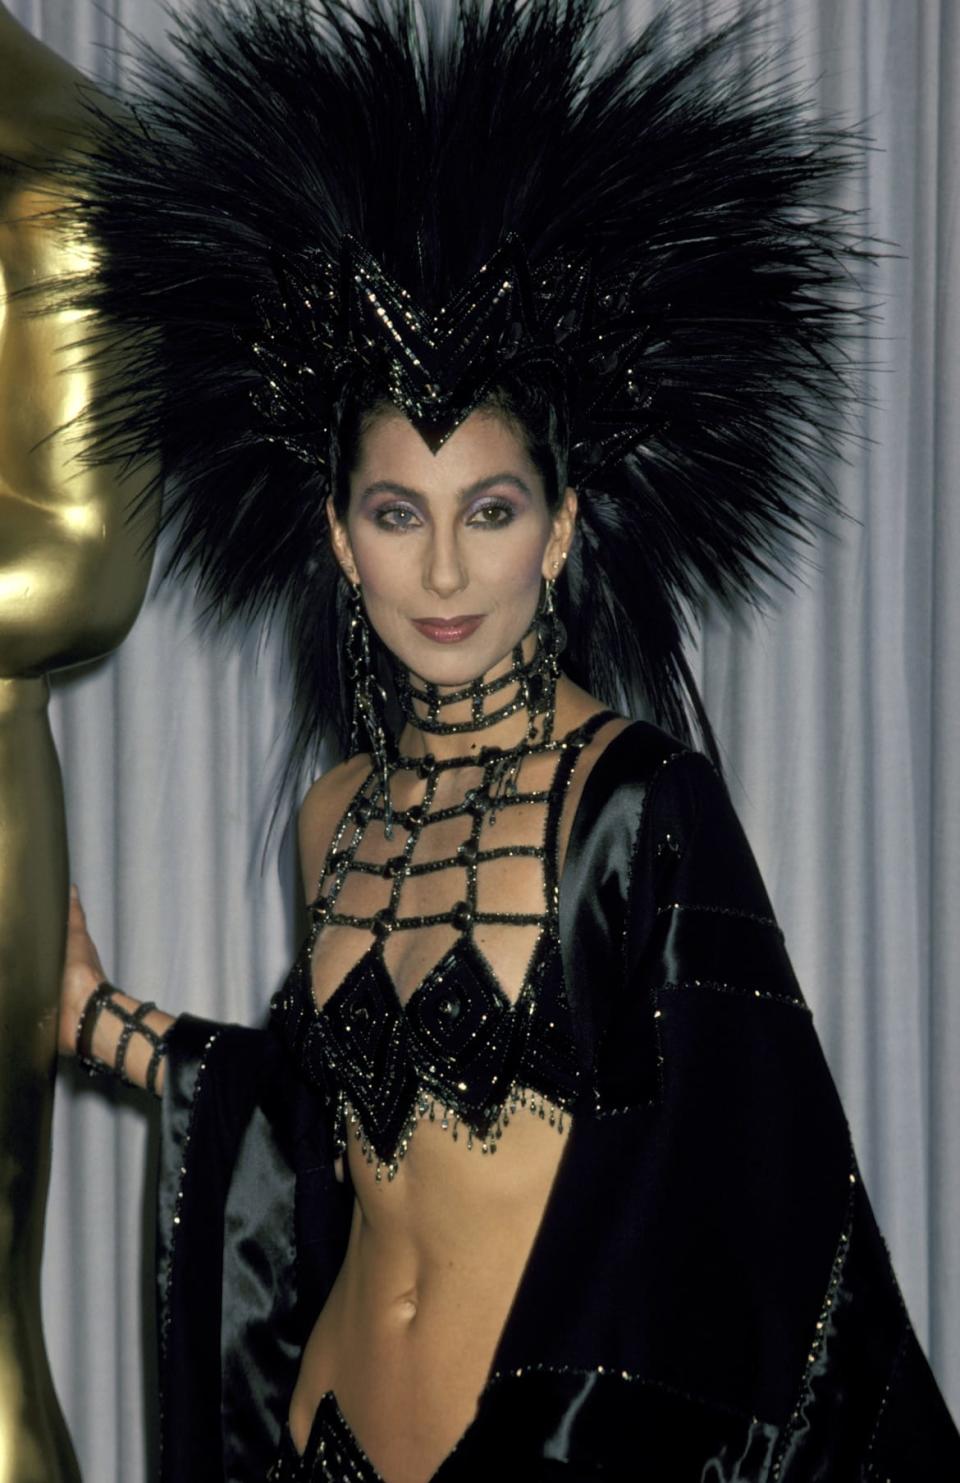 <div class="inline-image__caption"><p>Cher at the Dorothy Chandler Pavillion in Los Angeles, CA for the 58th Annual Academy Awards on March 24, 1986.</p></div> <div class="inline-image__credit">Jim Smeal/Getty</div>